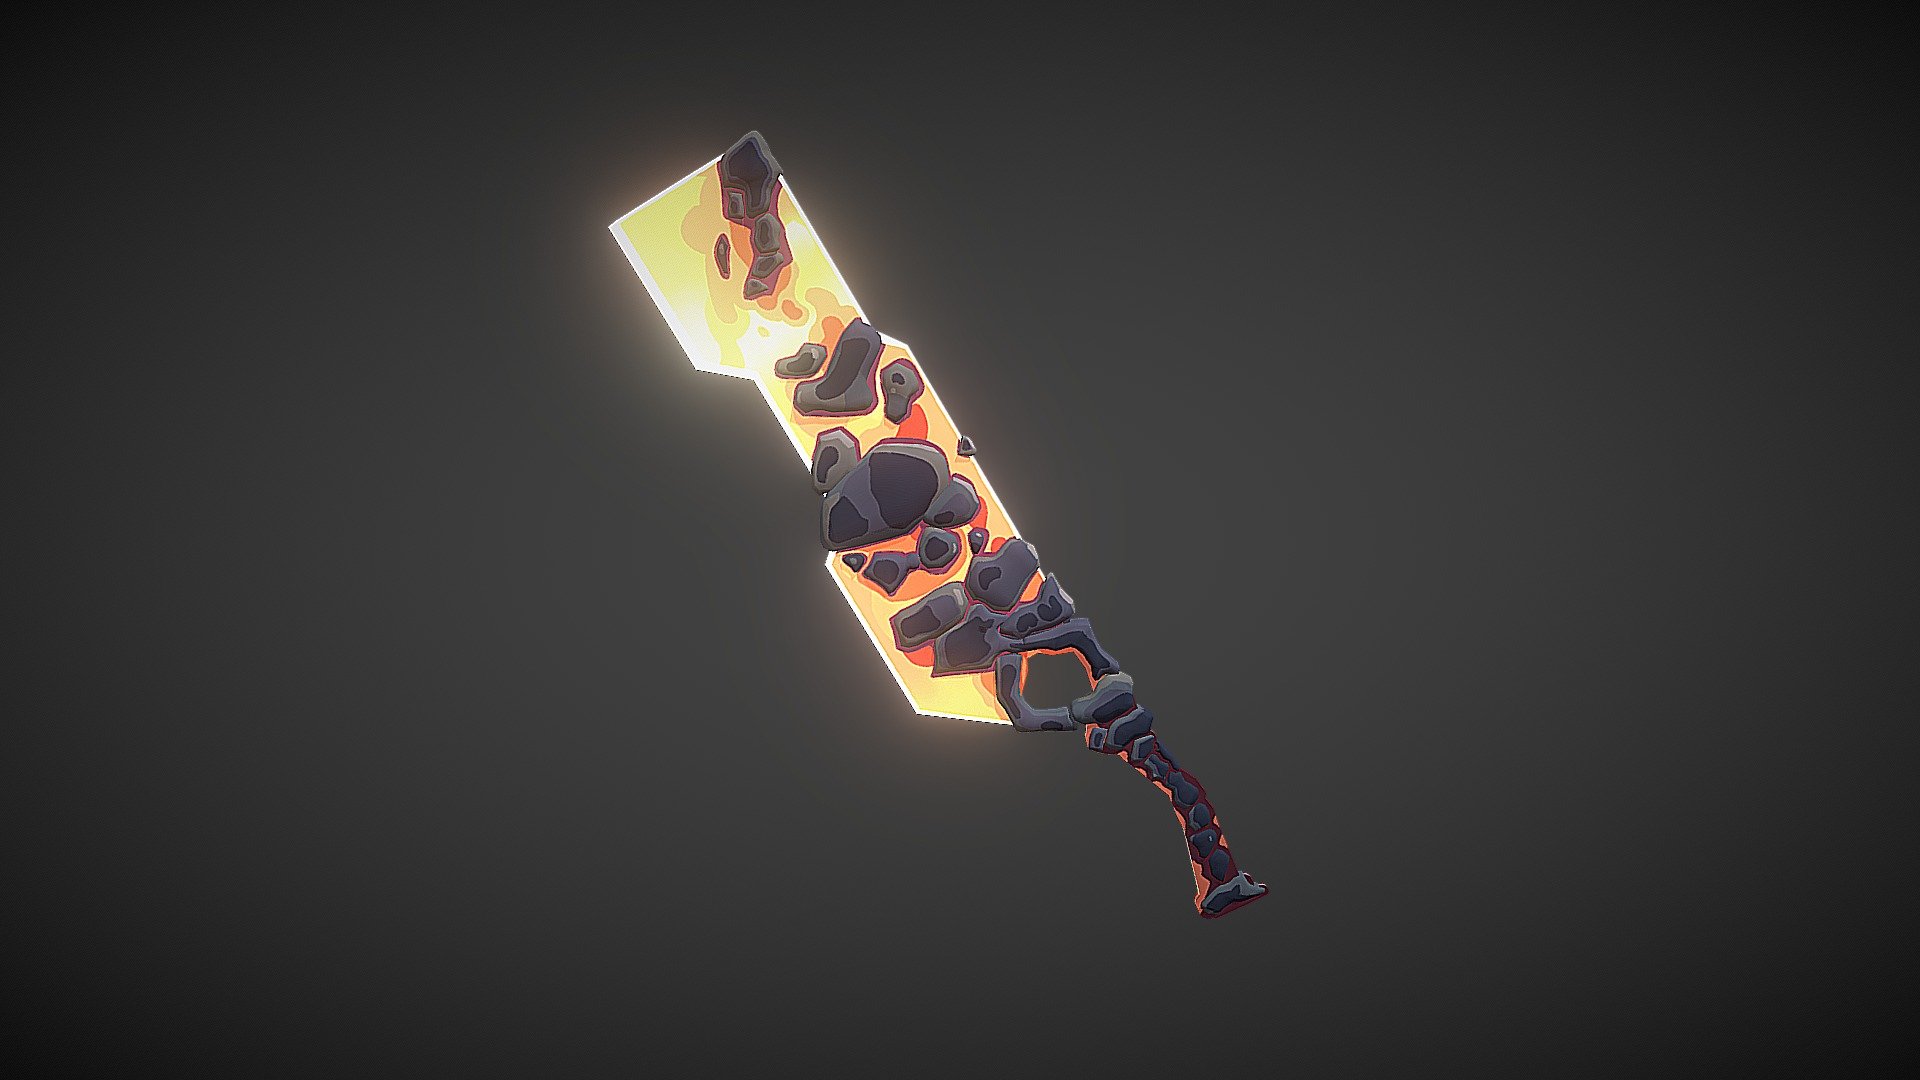 A Stylized Magma sword prop or asset. Perfect for any fantasy game with magyc weapons and with a Stylized style.
Rocks where SCulpted in Zbrush and retopologized in 3DCoat, the blade was modeled in Blender, textured in Substance painter. 4.386 faces 3d model